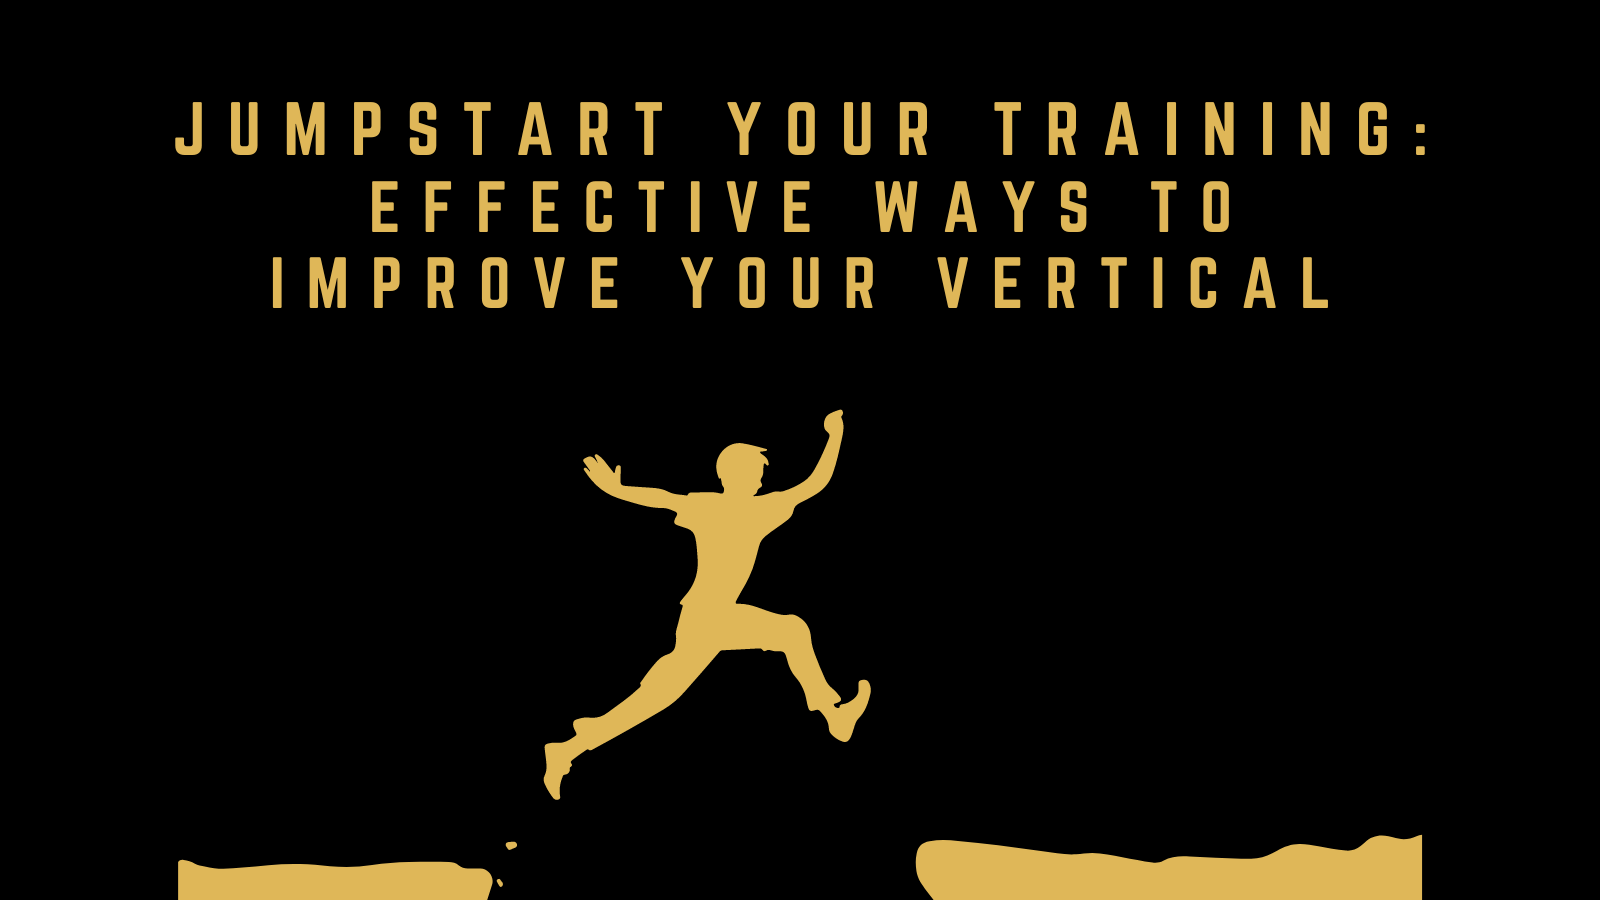 Jumpstart Your Training: Effective Ways to Improve Your Vertical